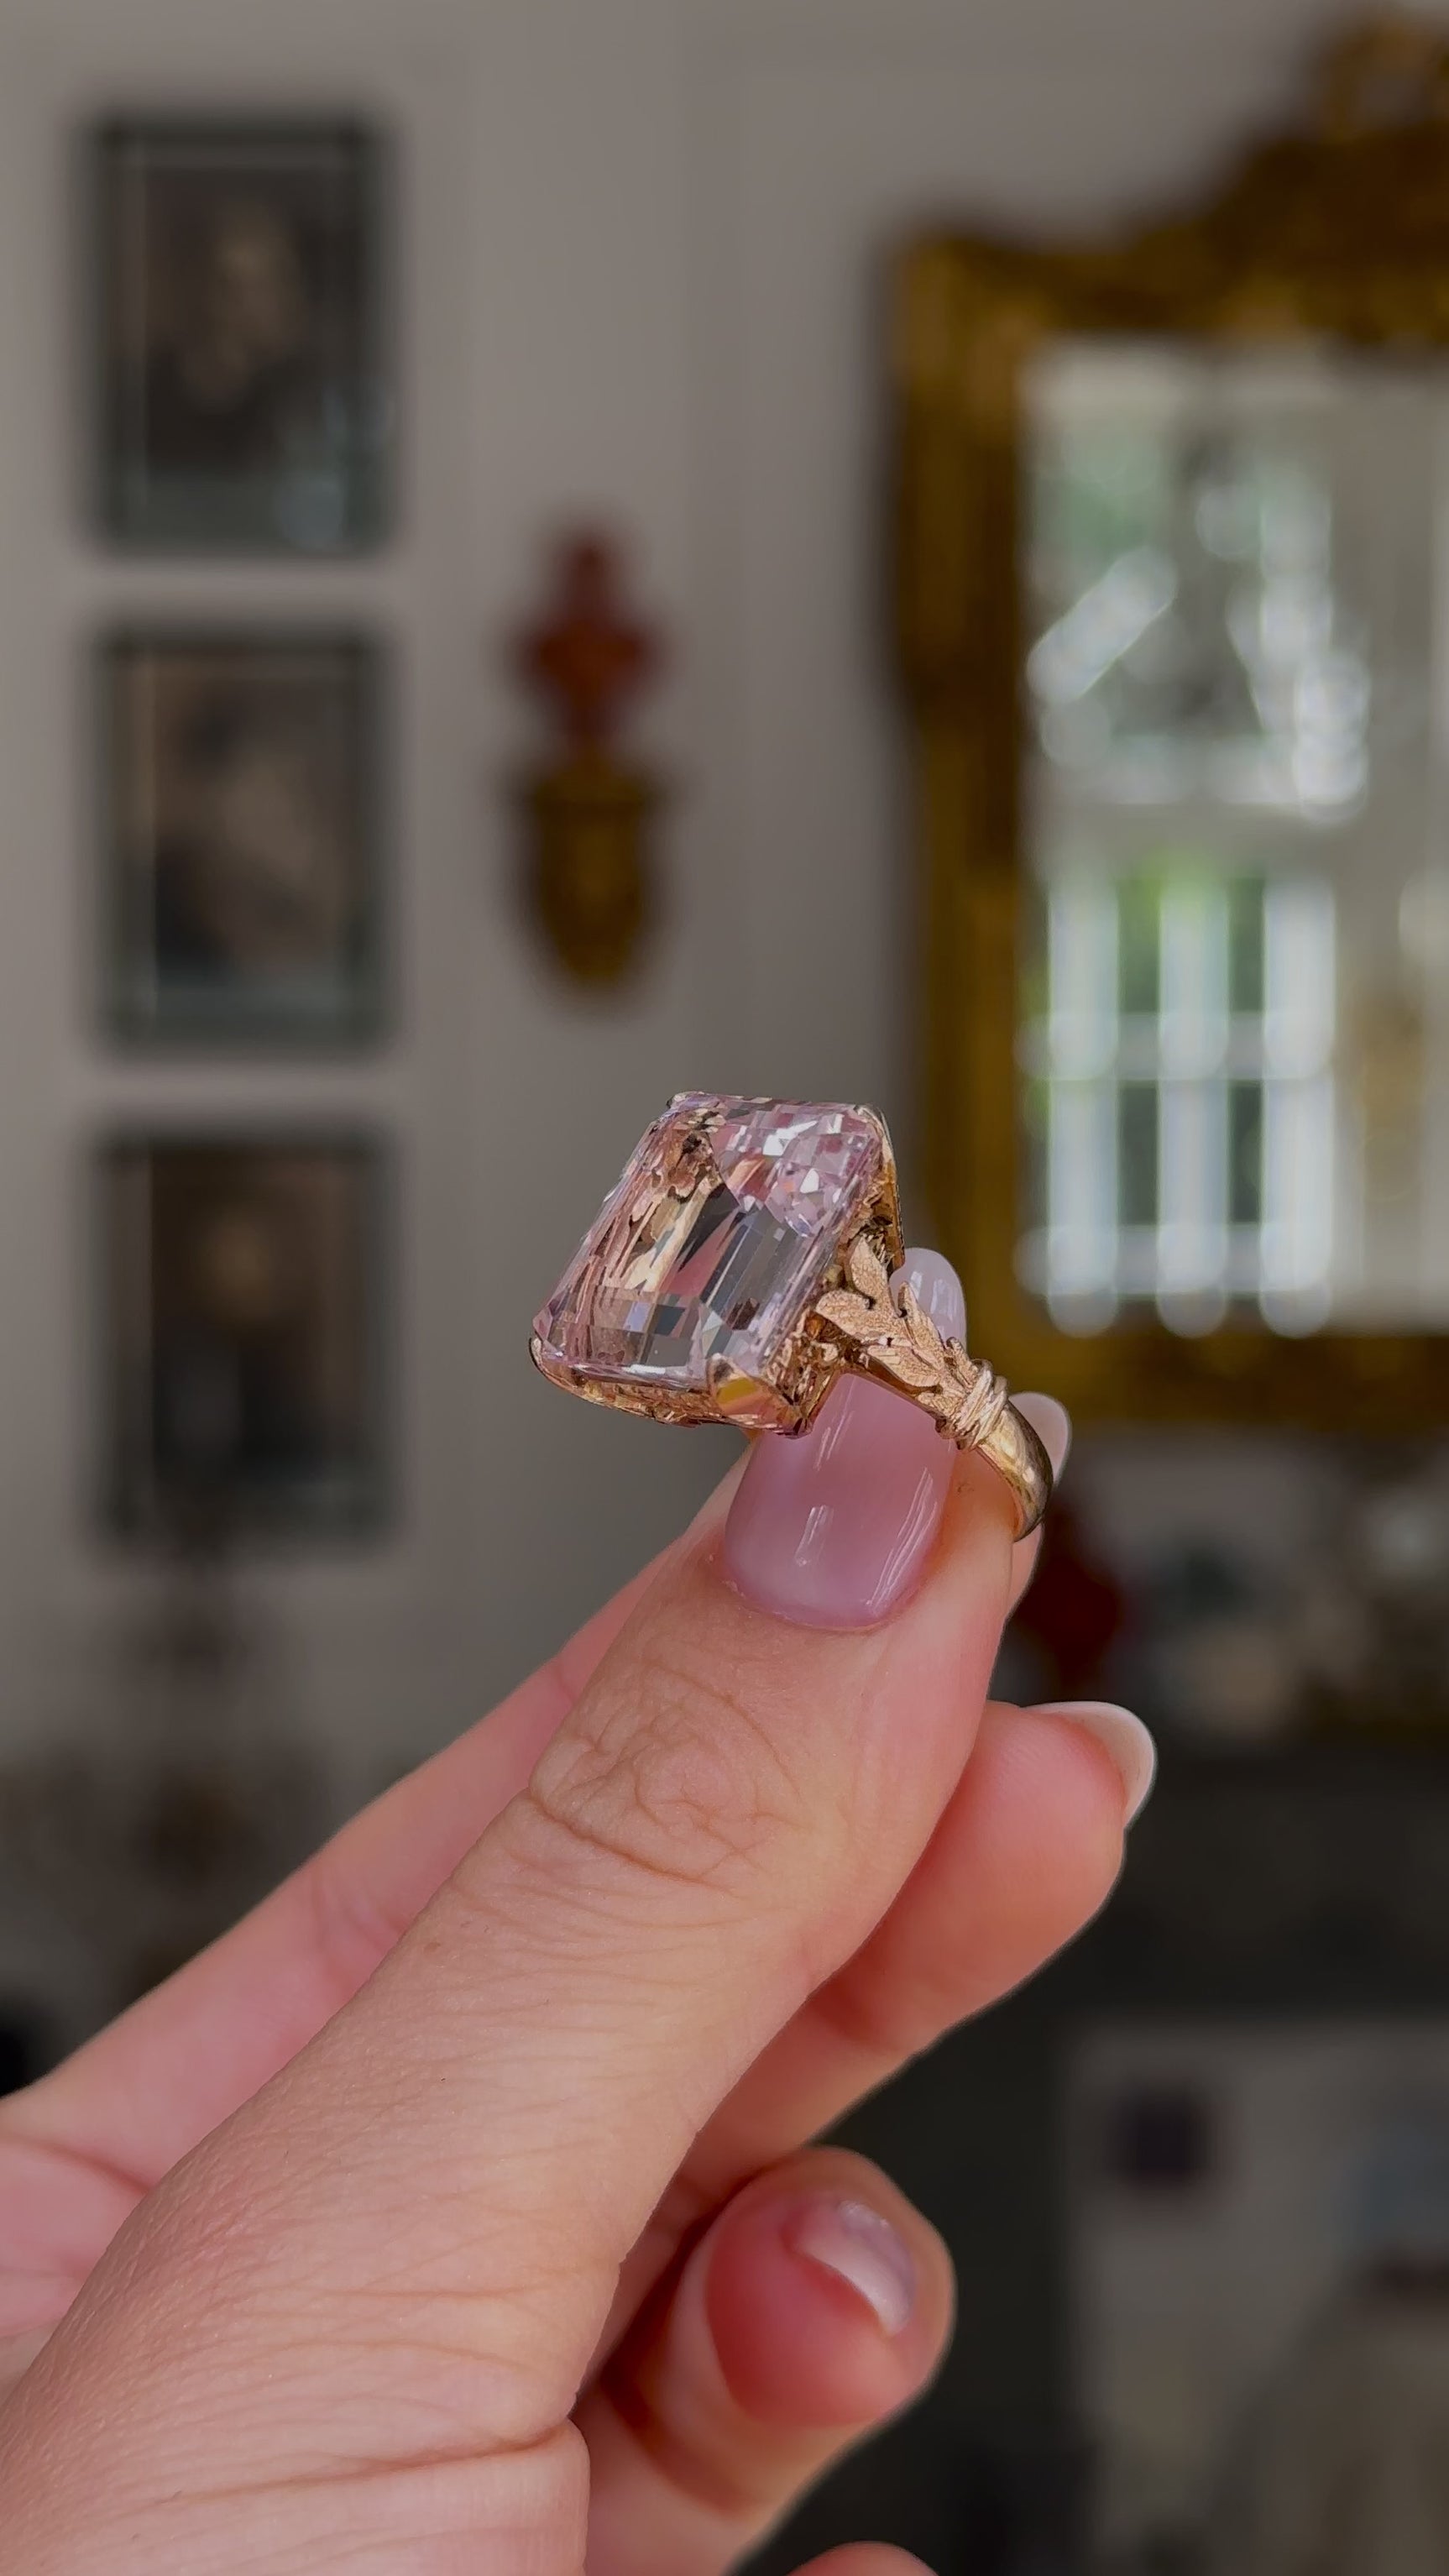 Morganite cocktail ring held in fingers and moved around to give perspective.